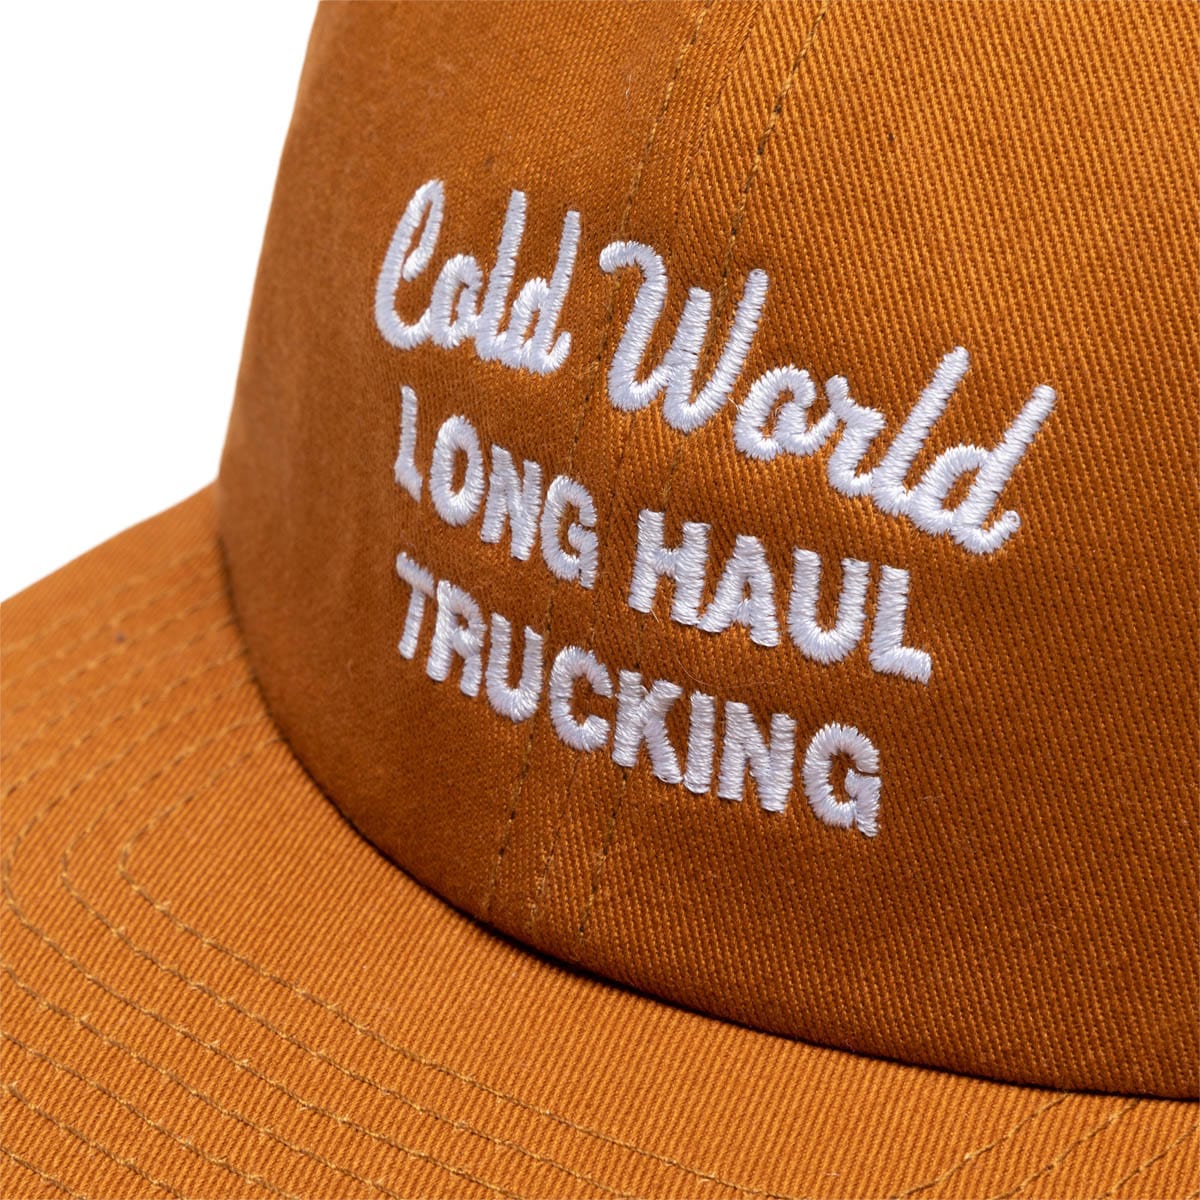 Cold World Frozen Goods Headwear SADDLE BROWN / O/S LONG HAUL TRUCKING HAT Saddle Brown